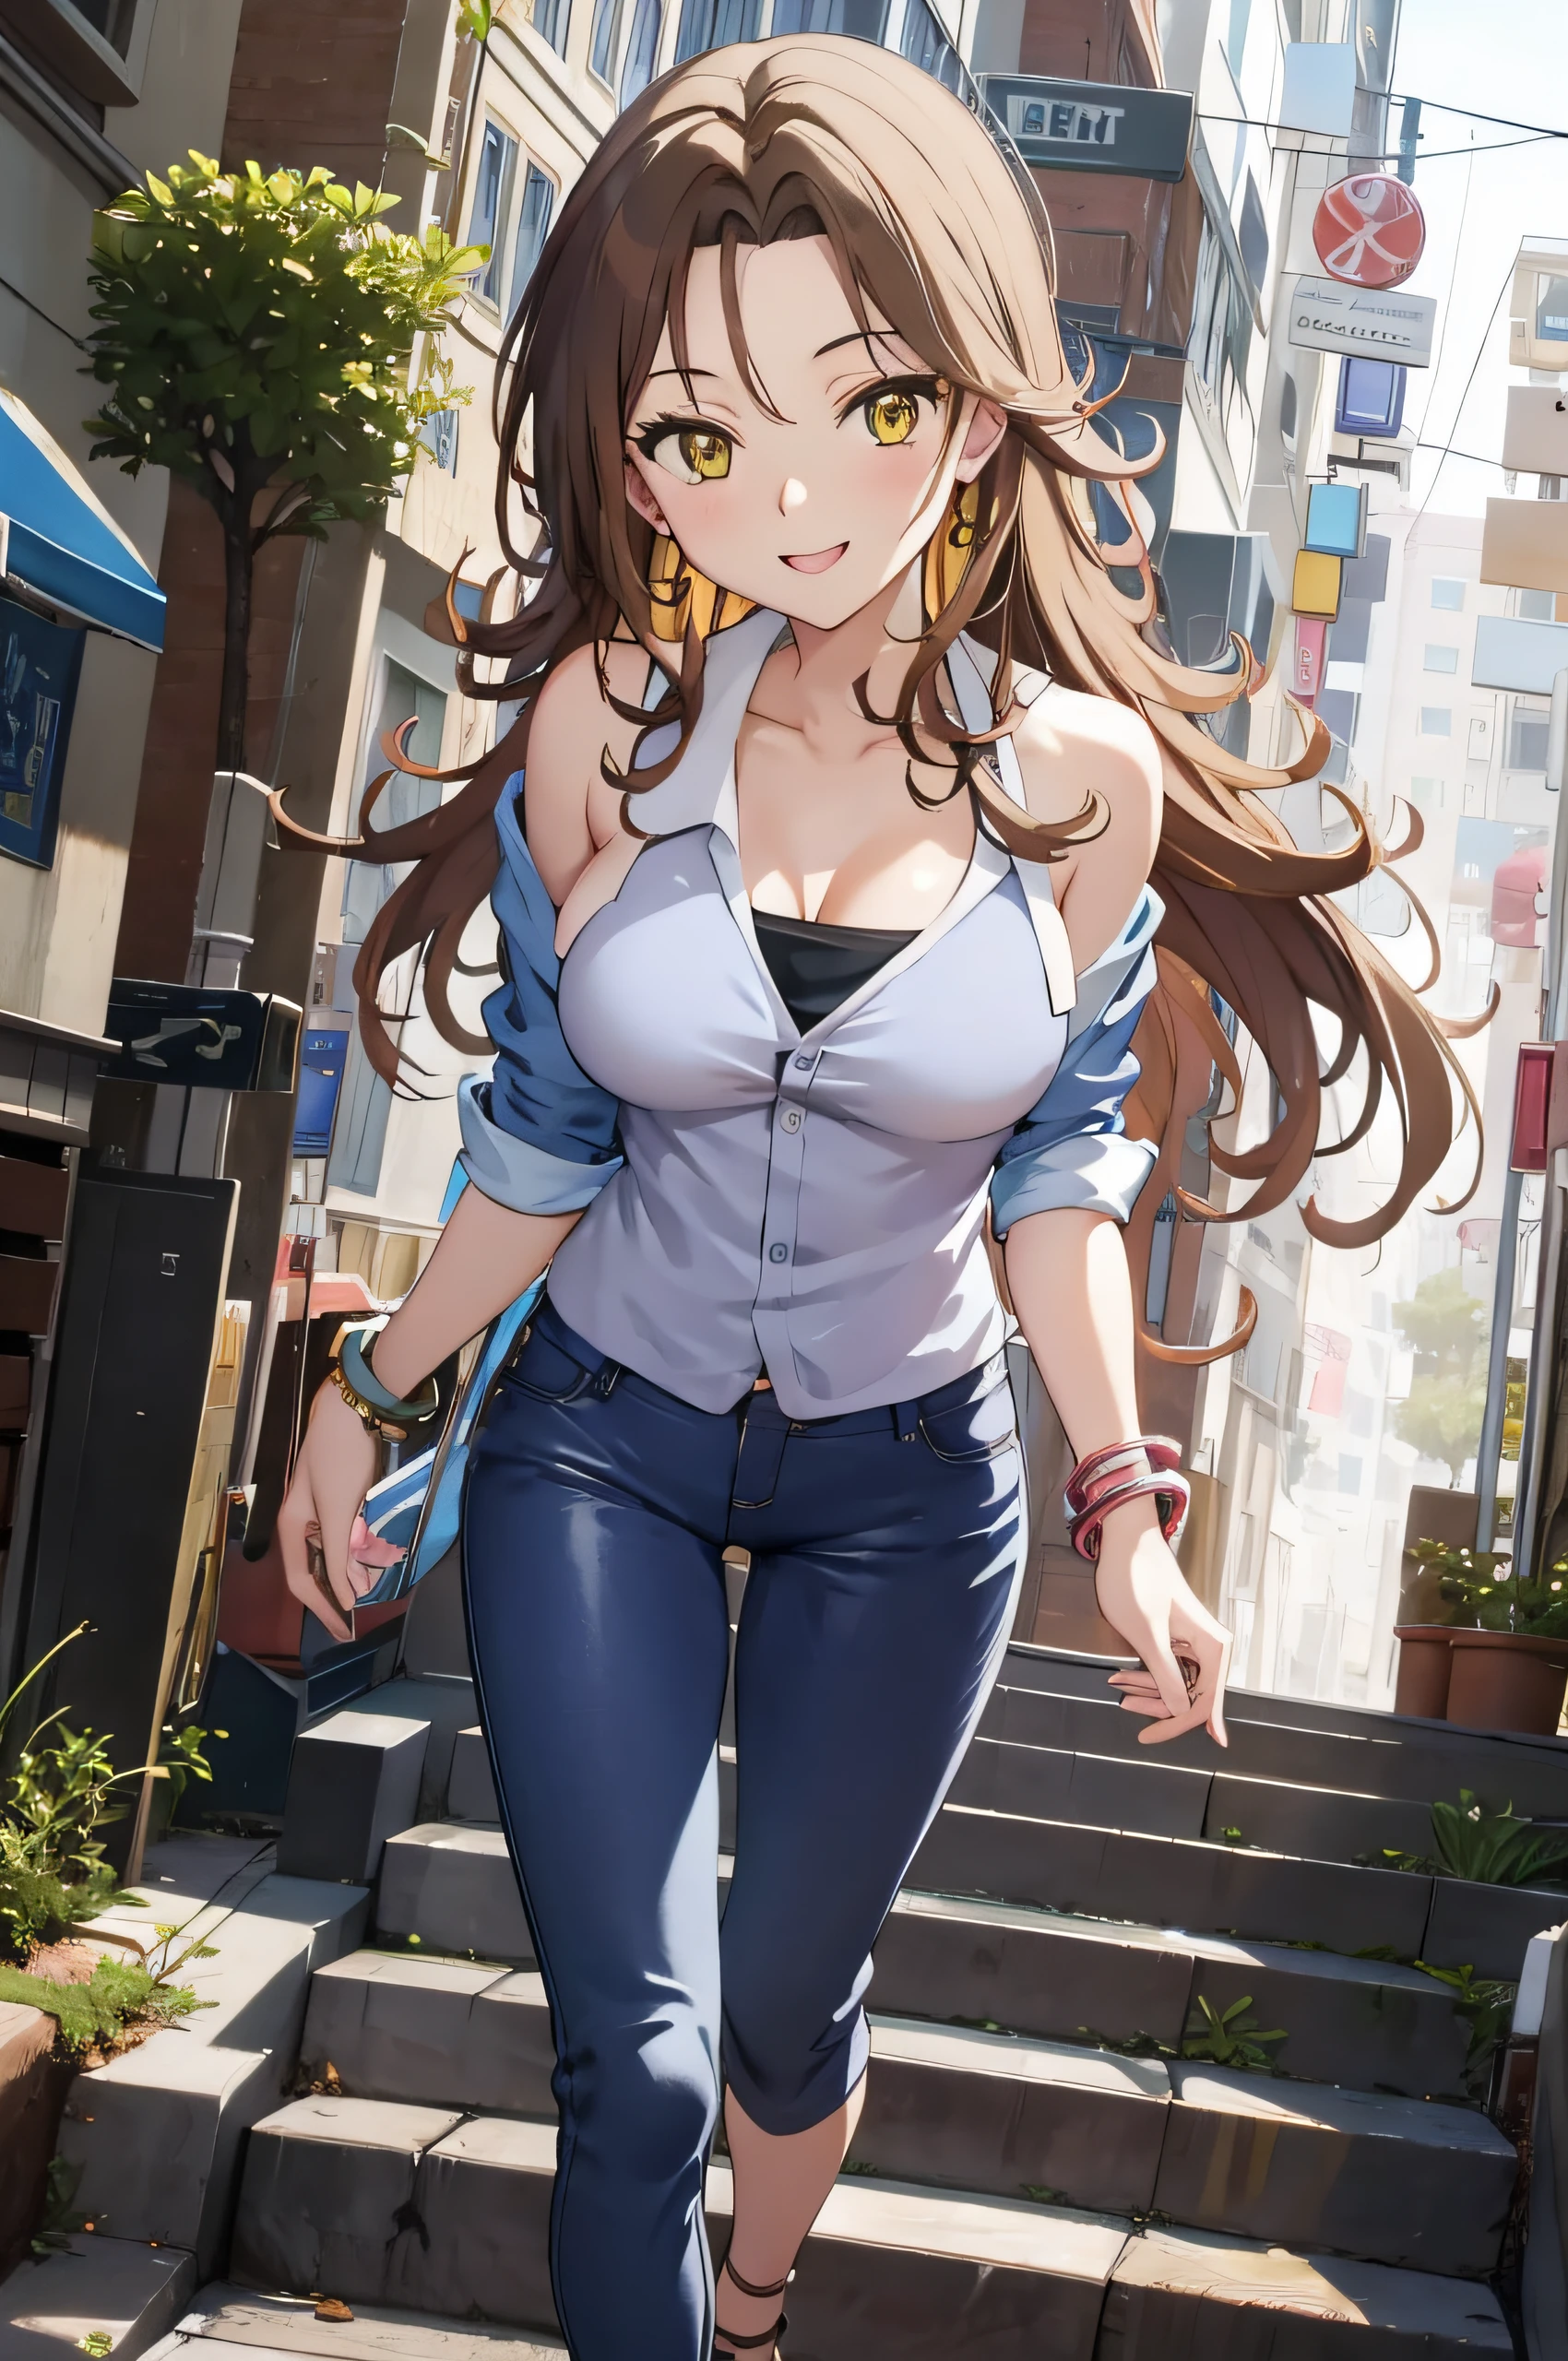 (masterpiece, best quality, detailed) ,1girl, solo, breasts, (brown hair:1.2), cleavage, jewelry, bracelet, yellow eyes,sumeragi lee noriega,blue jeans walking down the street,cute anime girl, pretty anime girl, smooth anime cg art, beautiful anime girl, attractive anime girl, ecchi anime style, seductive anime girl.teasing smile, clean detailed anime art,high resolution, (perfect hands, perfect anatomy),